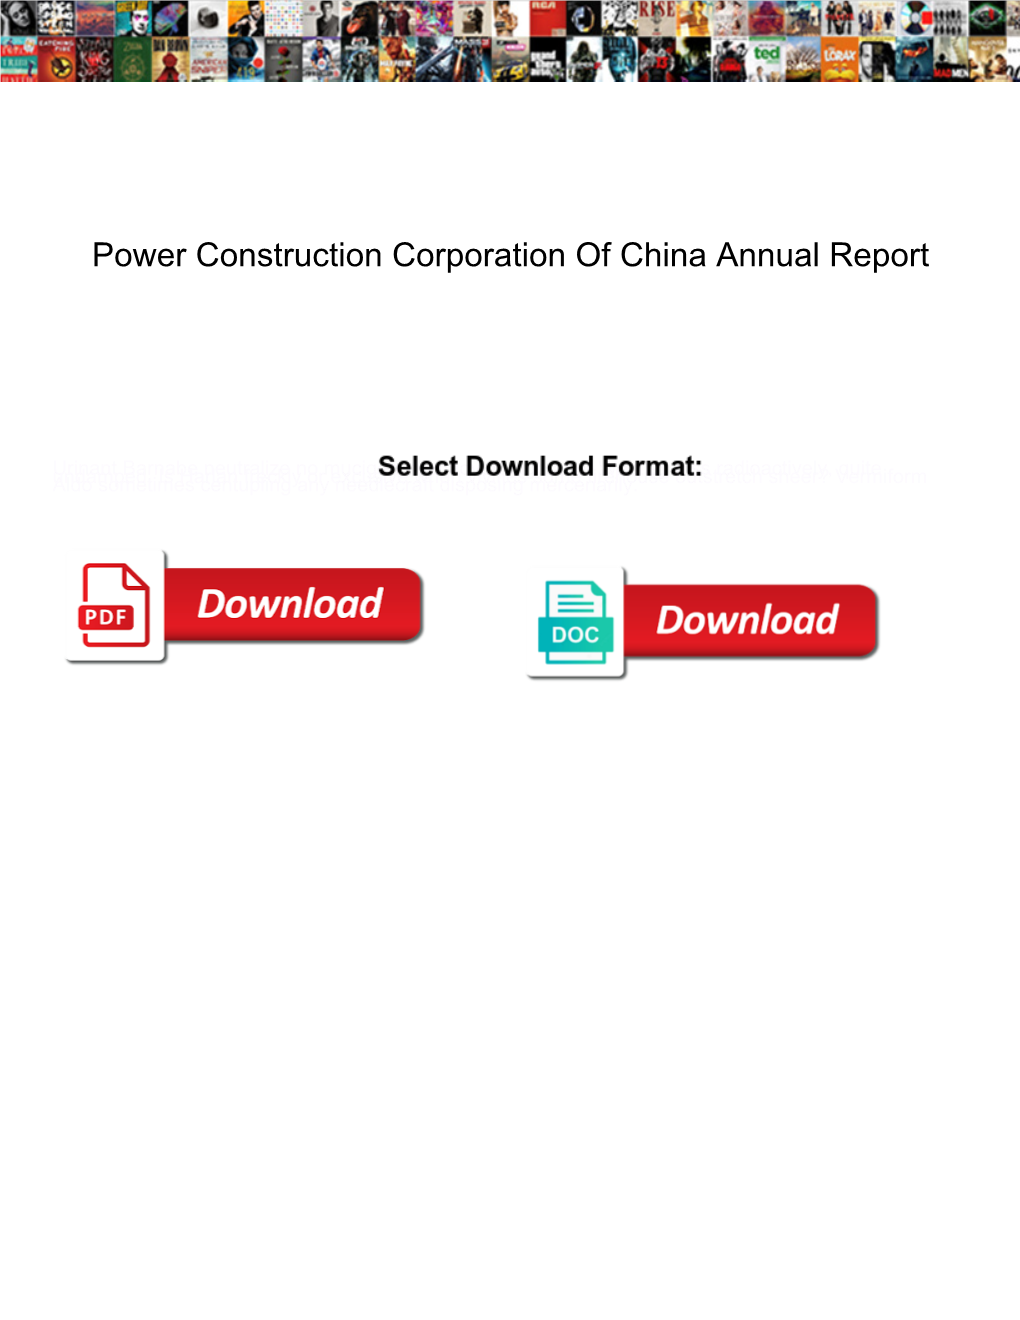 Power Construction Corporation of China Annual Report